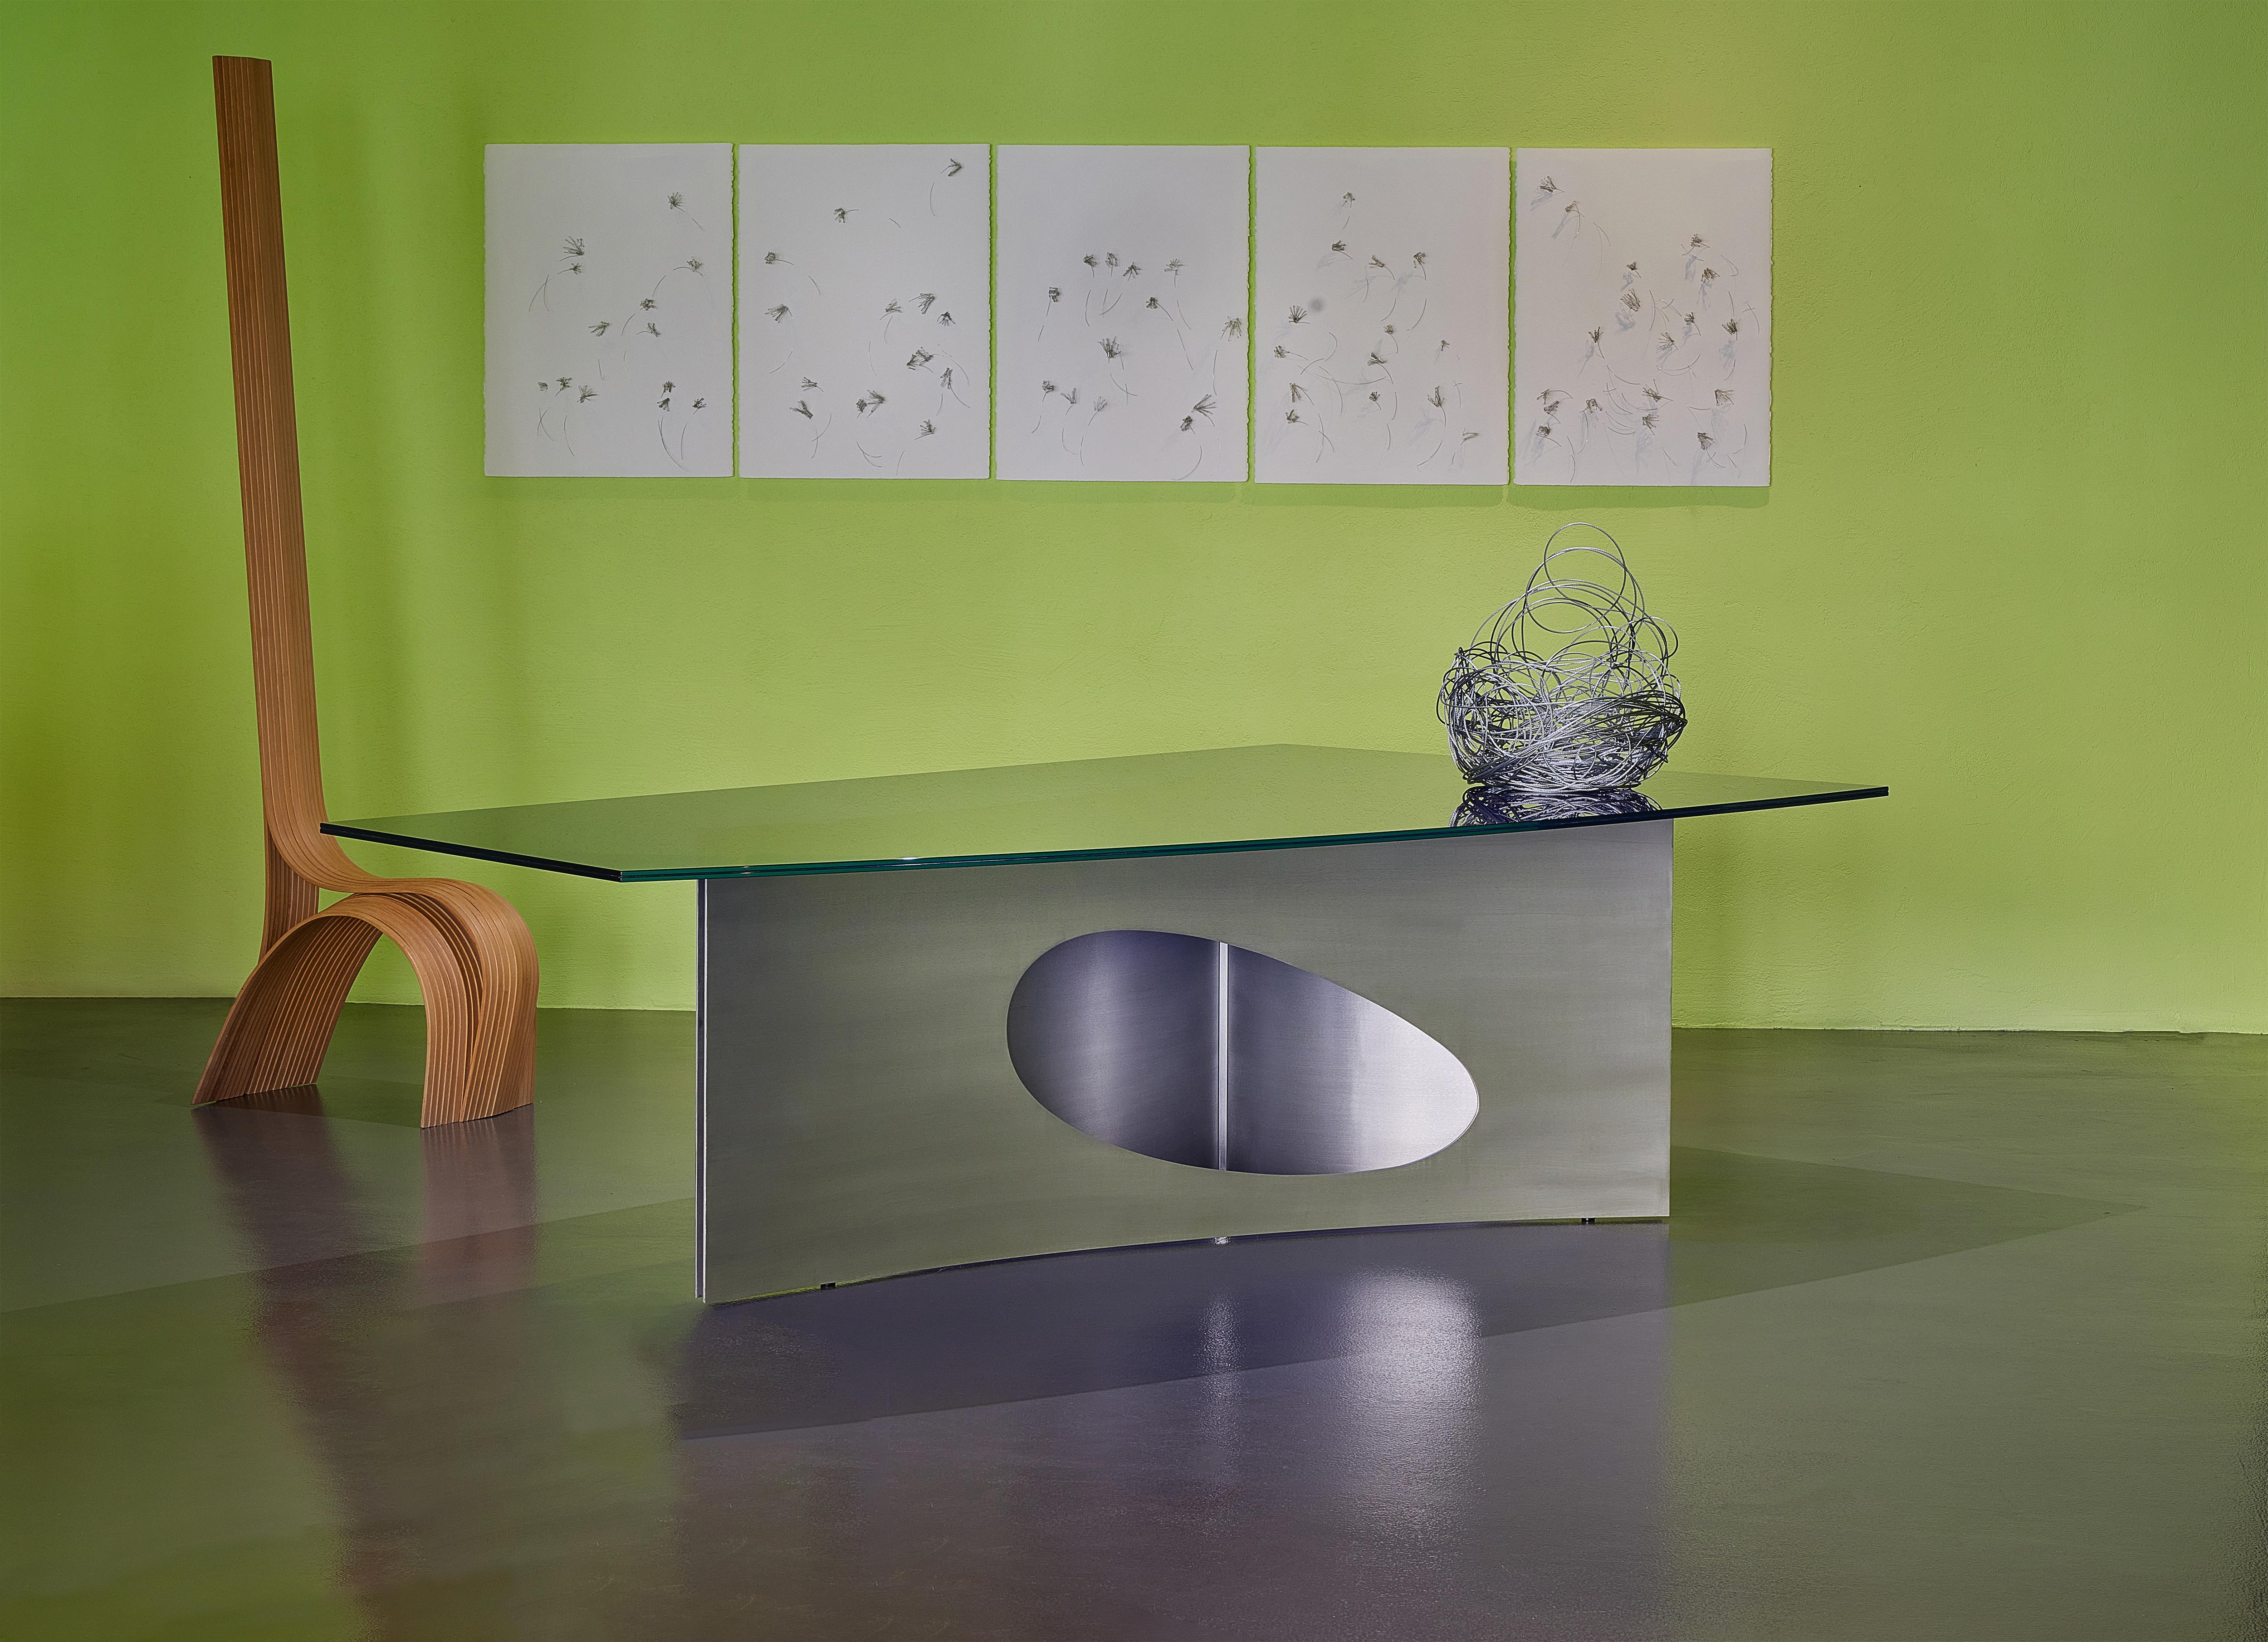 The dining table was designed by the your author Atelier Ferraro for Dilmos on the occasion of the Milan Design Week 2023.
